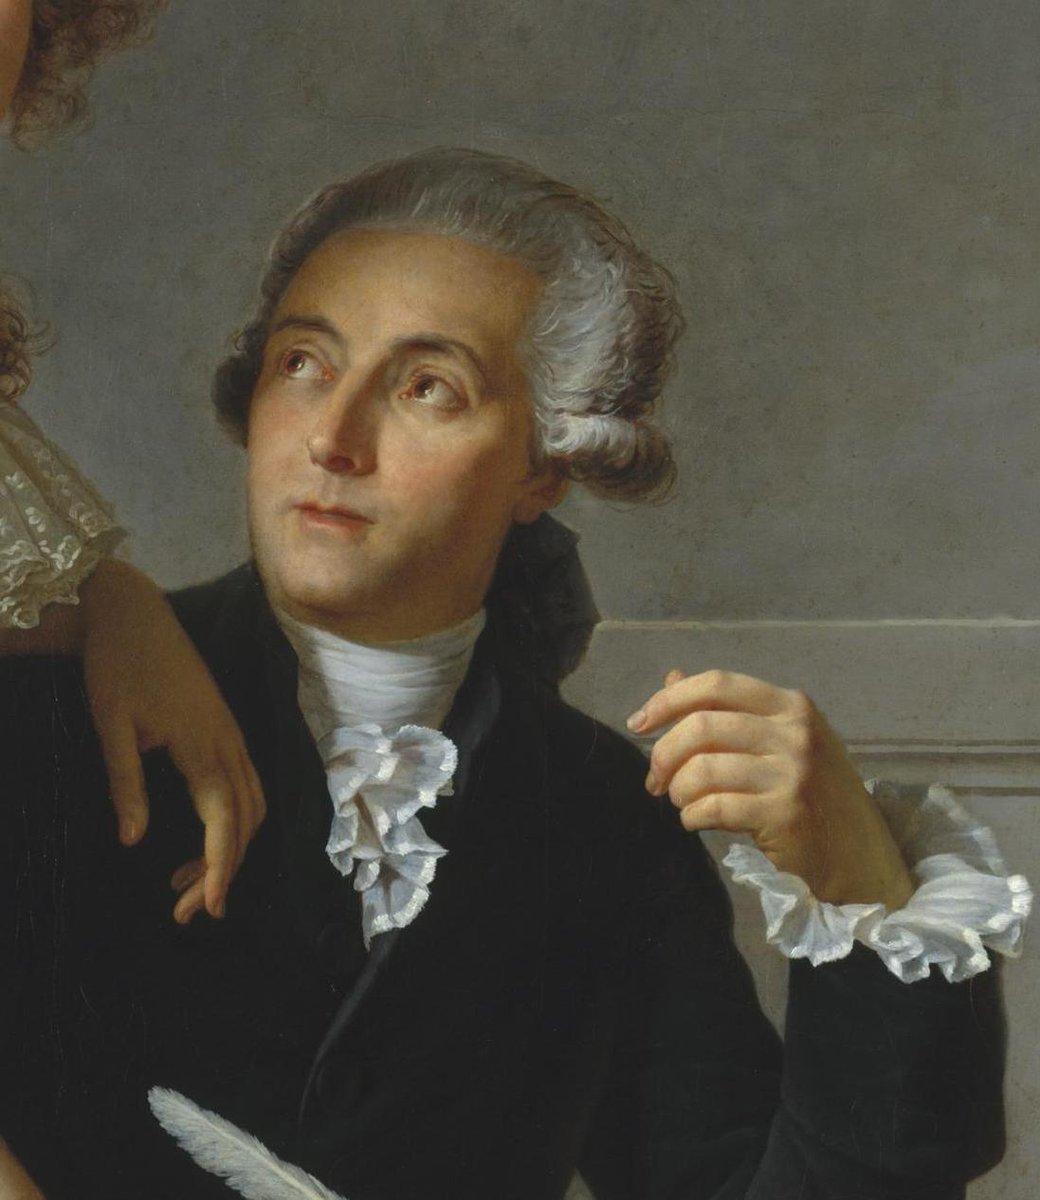 Lavoisier would have loved Langchain. Too bad he was born 300 years too early smh